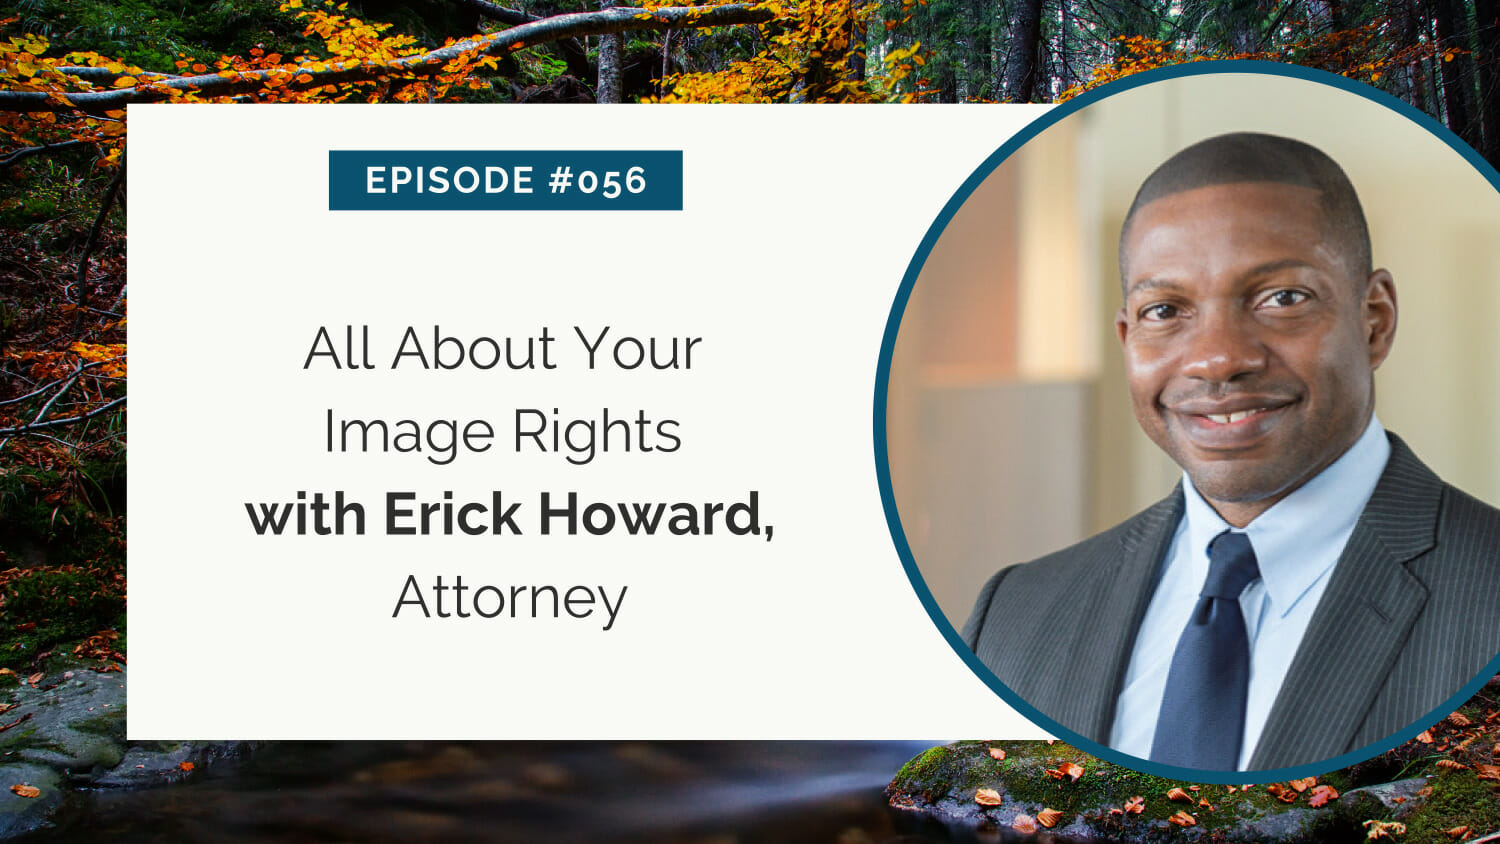 A promotional image for an episode of a series featuring erick howard, an attorney, discussing image rights.